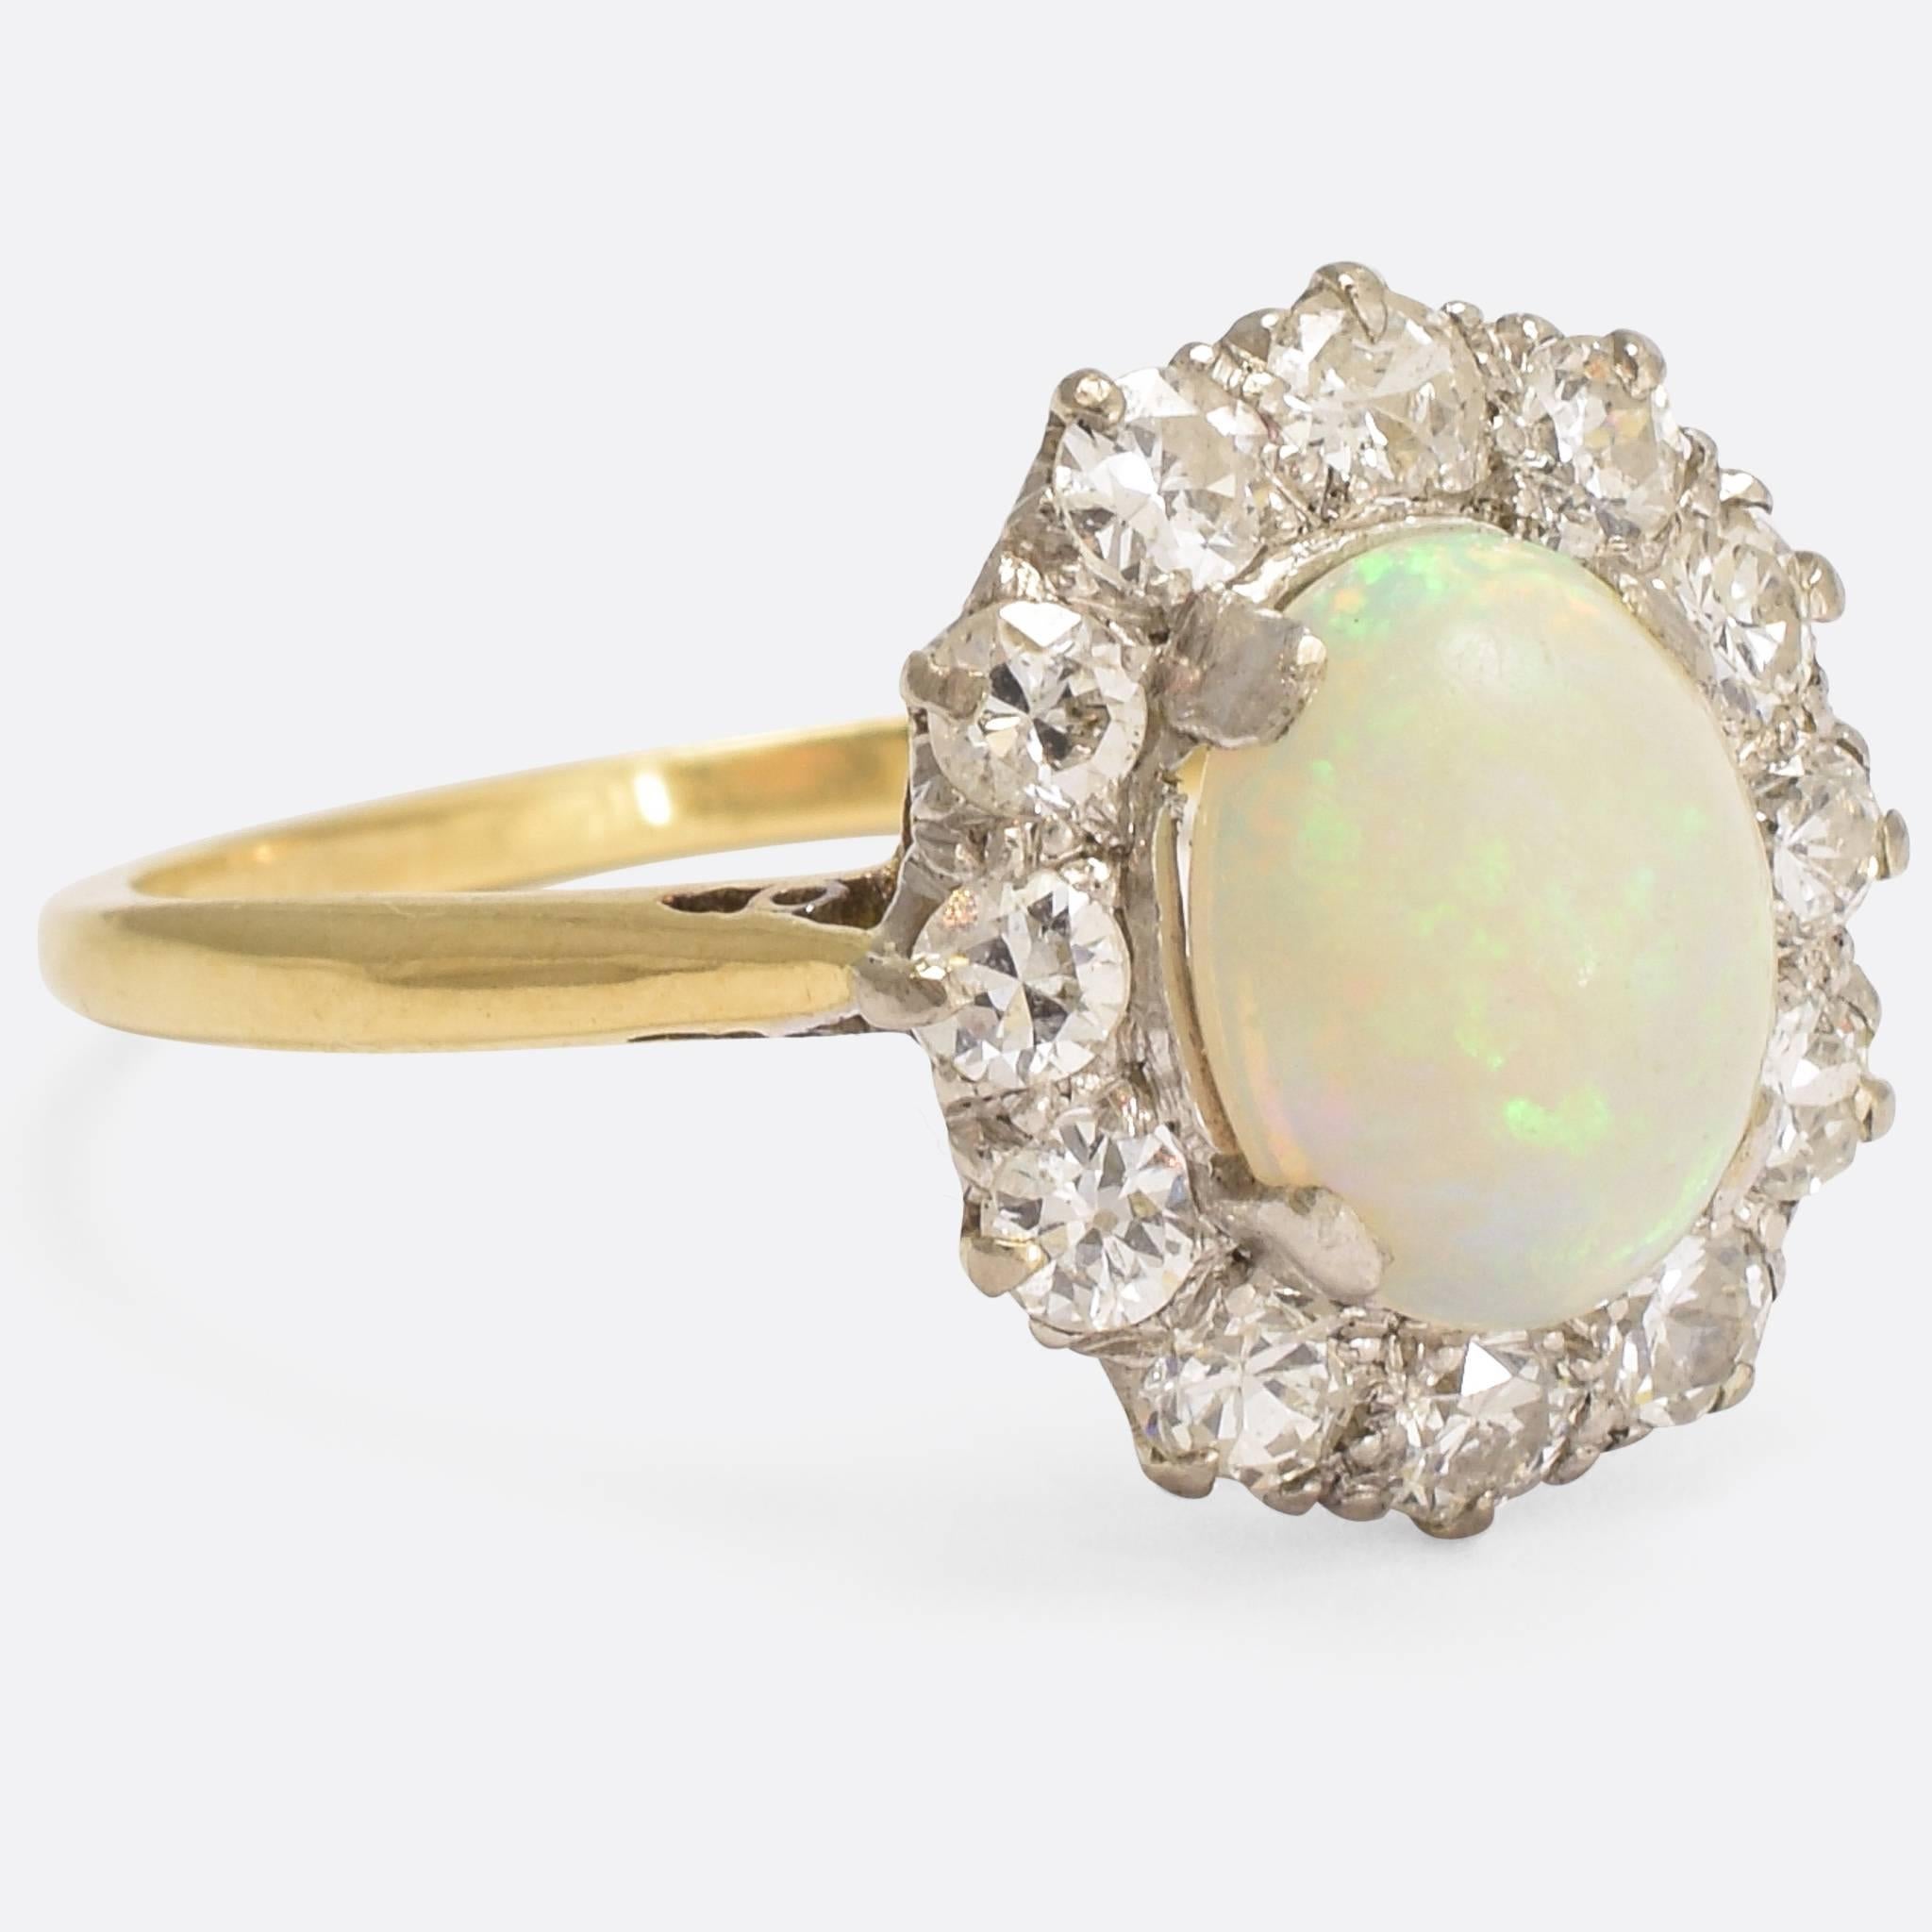 Simple, elegant, beautiful. A classic Edwardian opal and diamond halo ring modelled in 18k gold and platinum to create a lovely bi-metal contrast. The central stone is a deep cabochon cut - approx. 1.4ctw - full of fire and life, surrounded by a